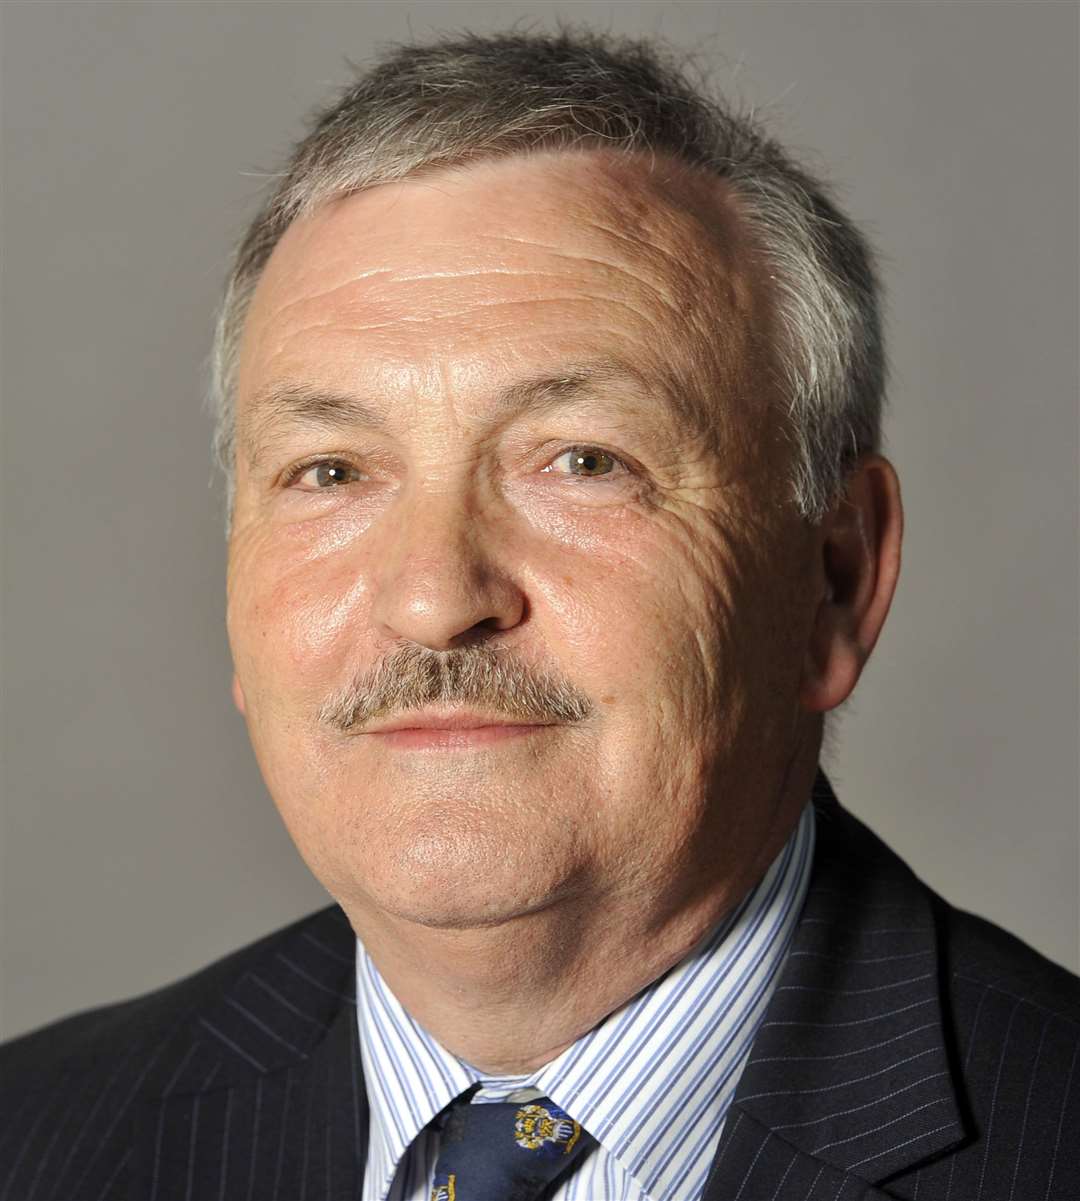 Medway Council leader Alan Jarrett says cabinet members will be replaced if they refuse to adhere to policy best serving the interests of those electing them.